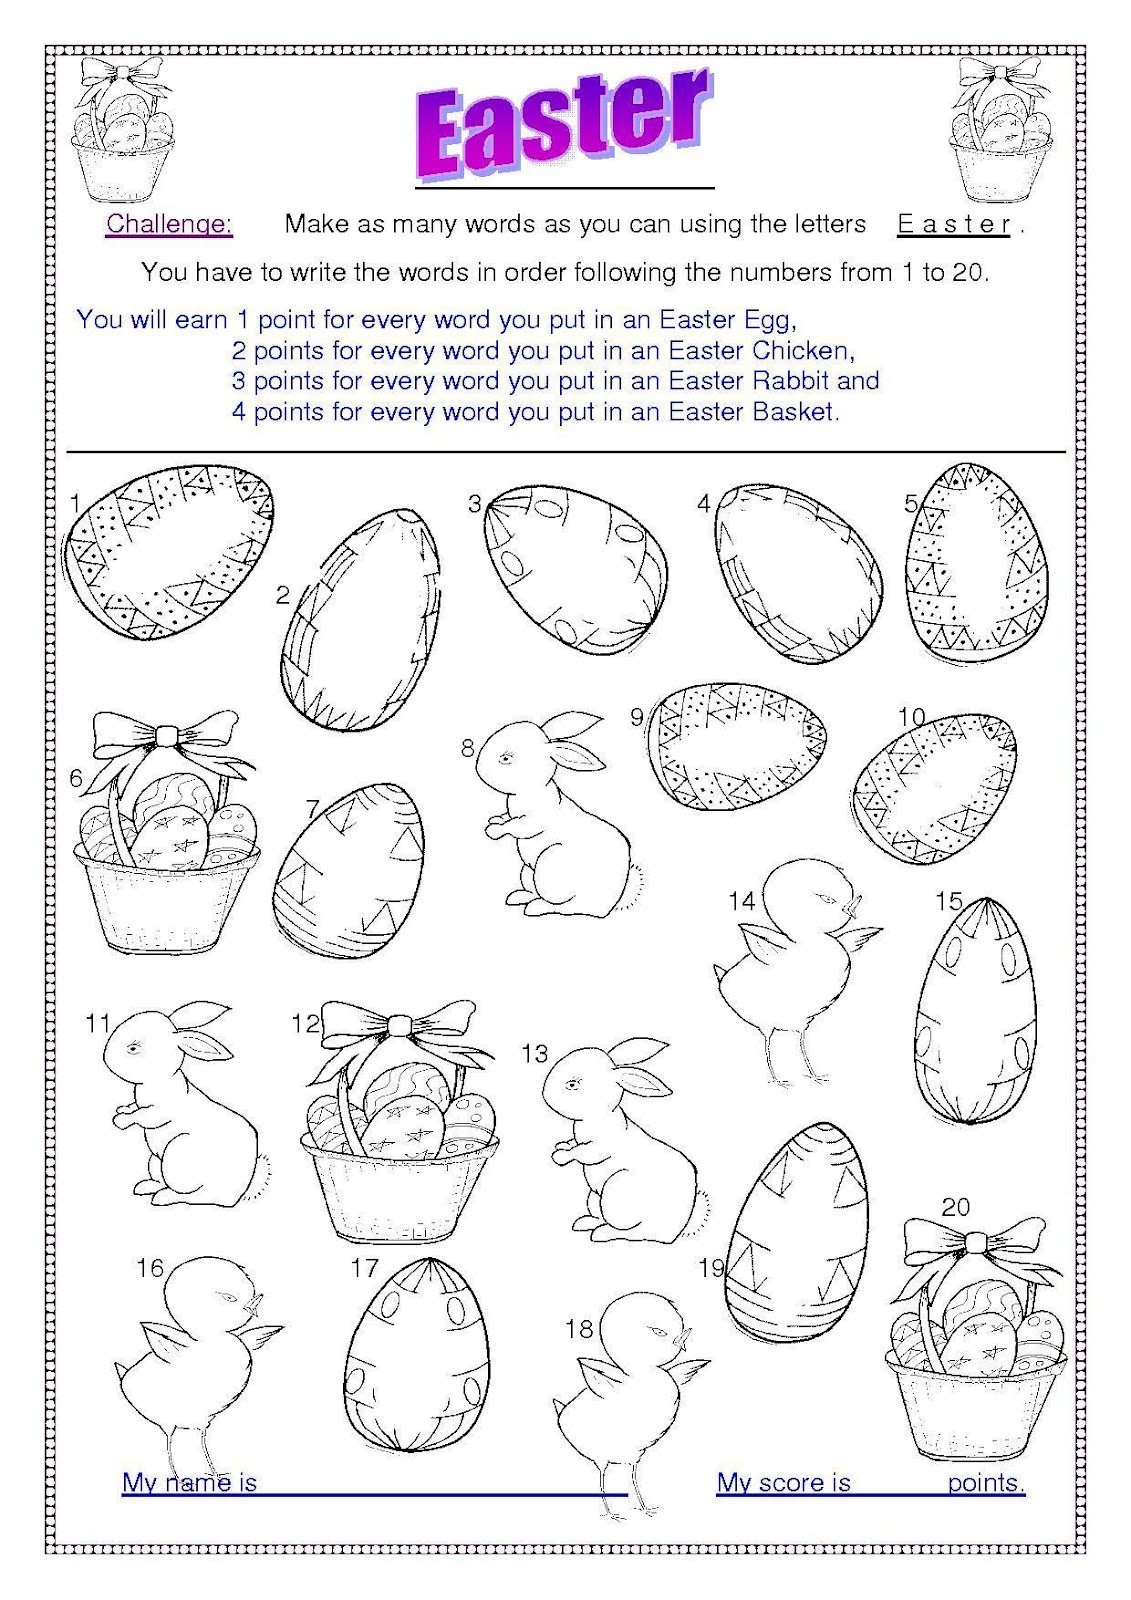 resurrection-coloring-page-empty-tomb-coloring-page-at-getcolorings